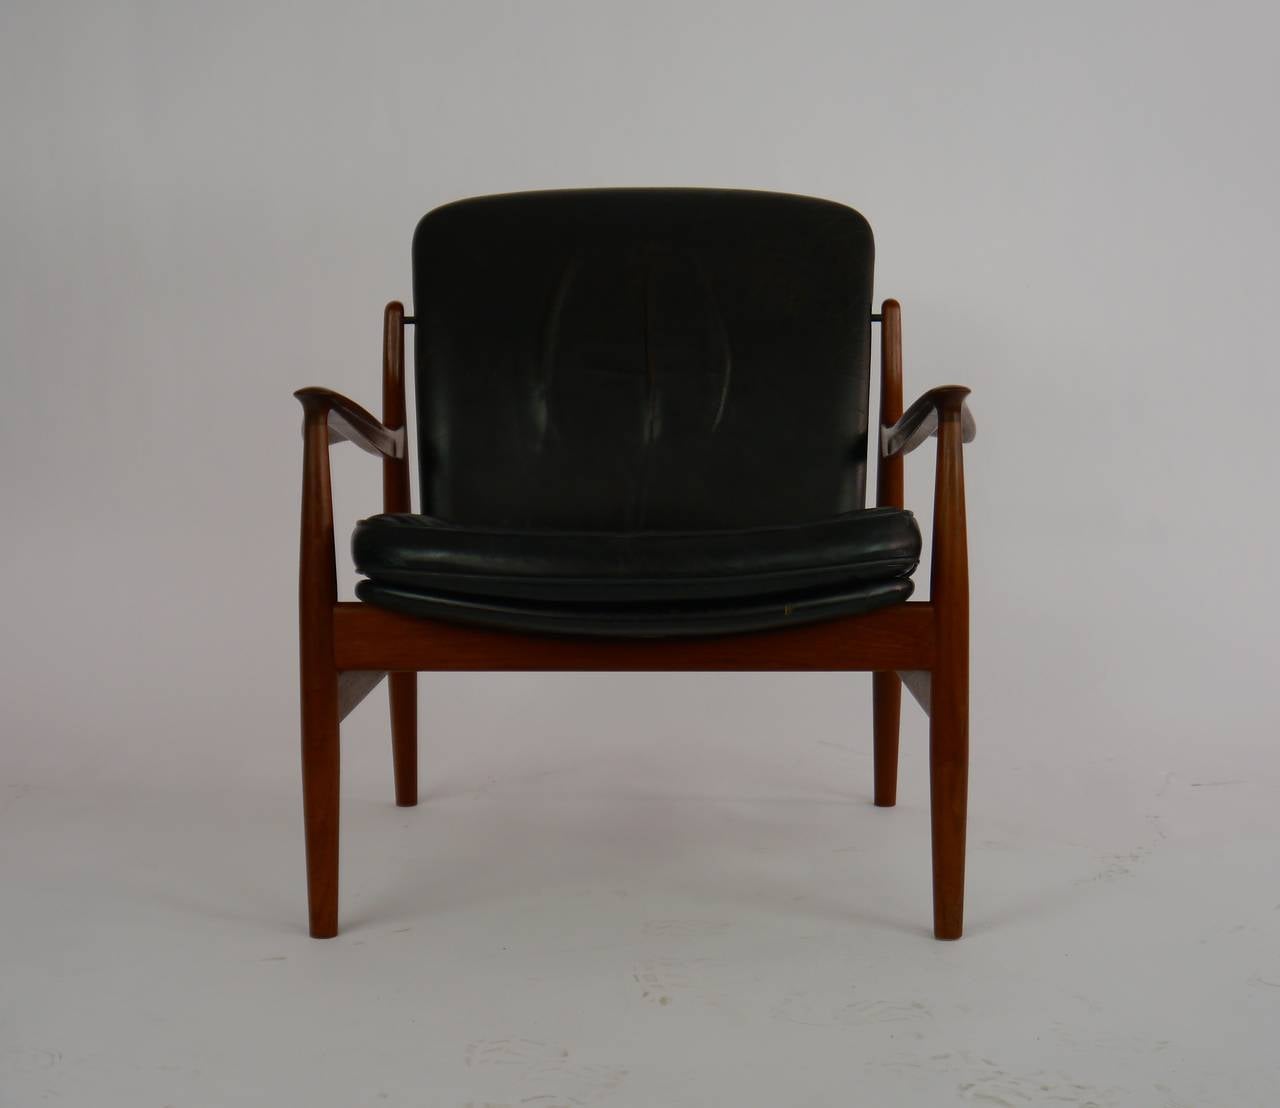 Mid-20th Century Teak and Leather Lounge Chair by Finn Juhl for France and Daverkosen For Sale